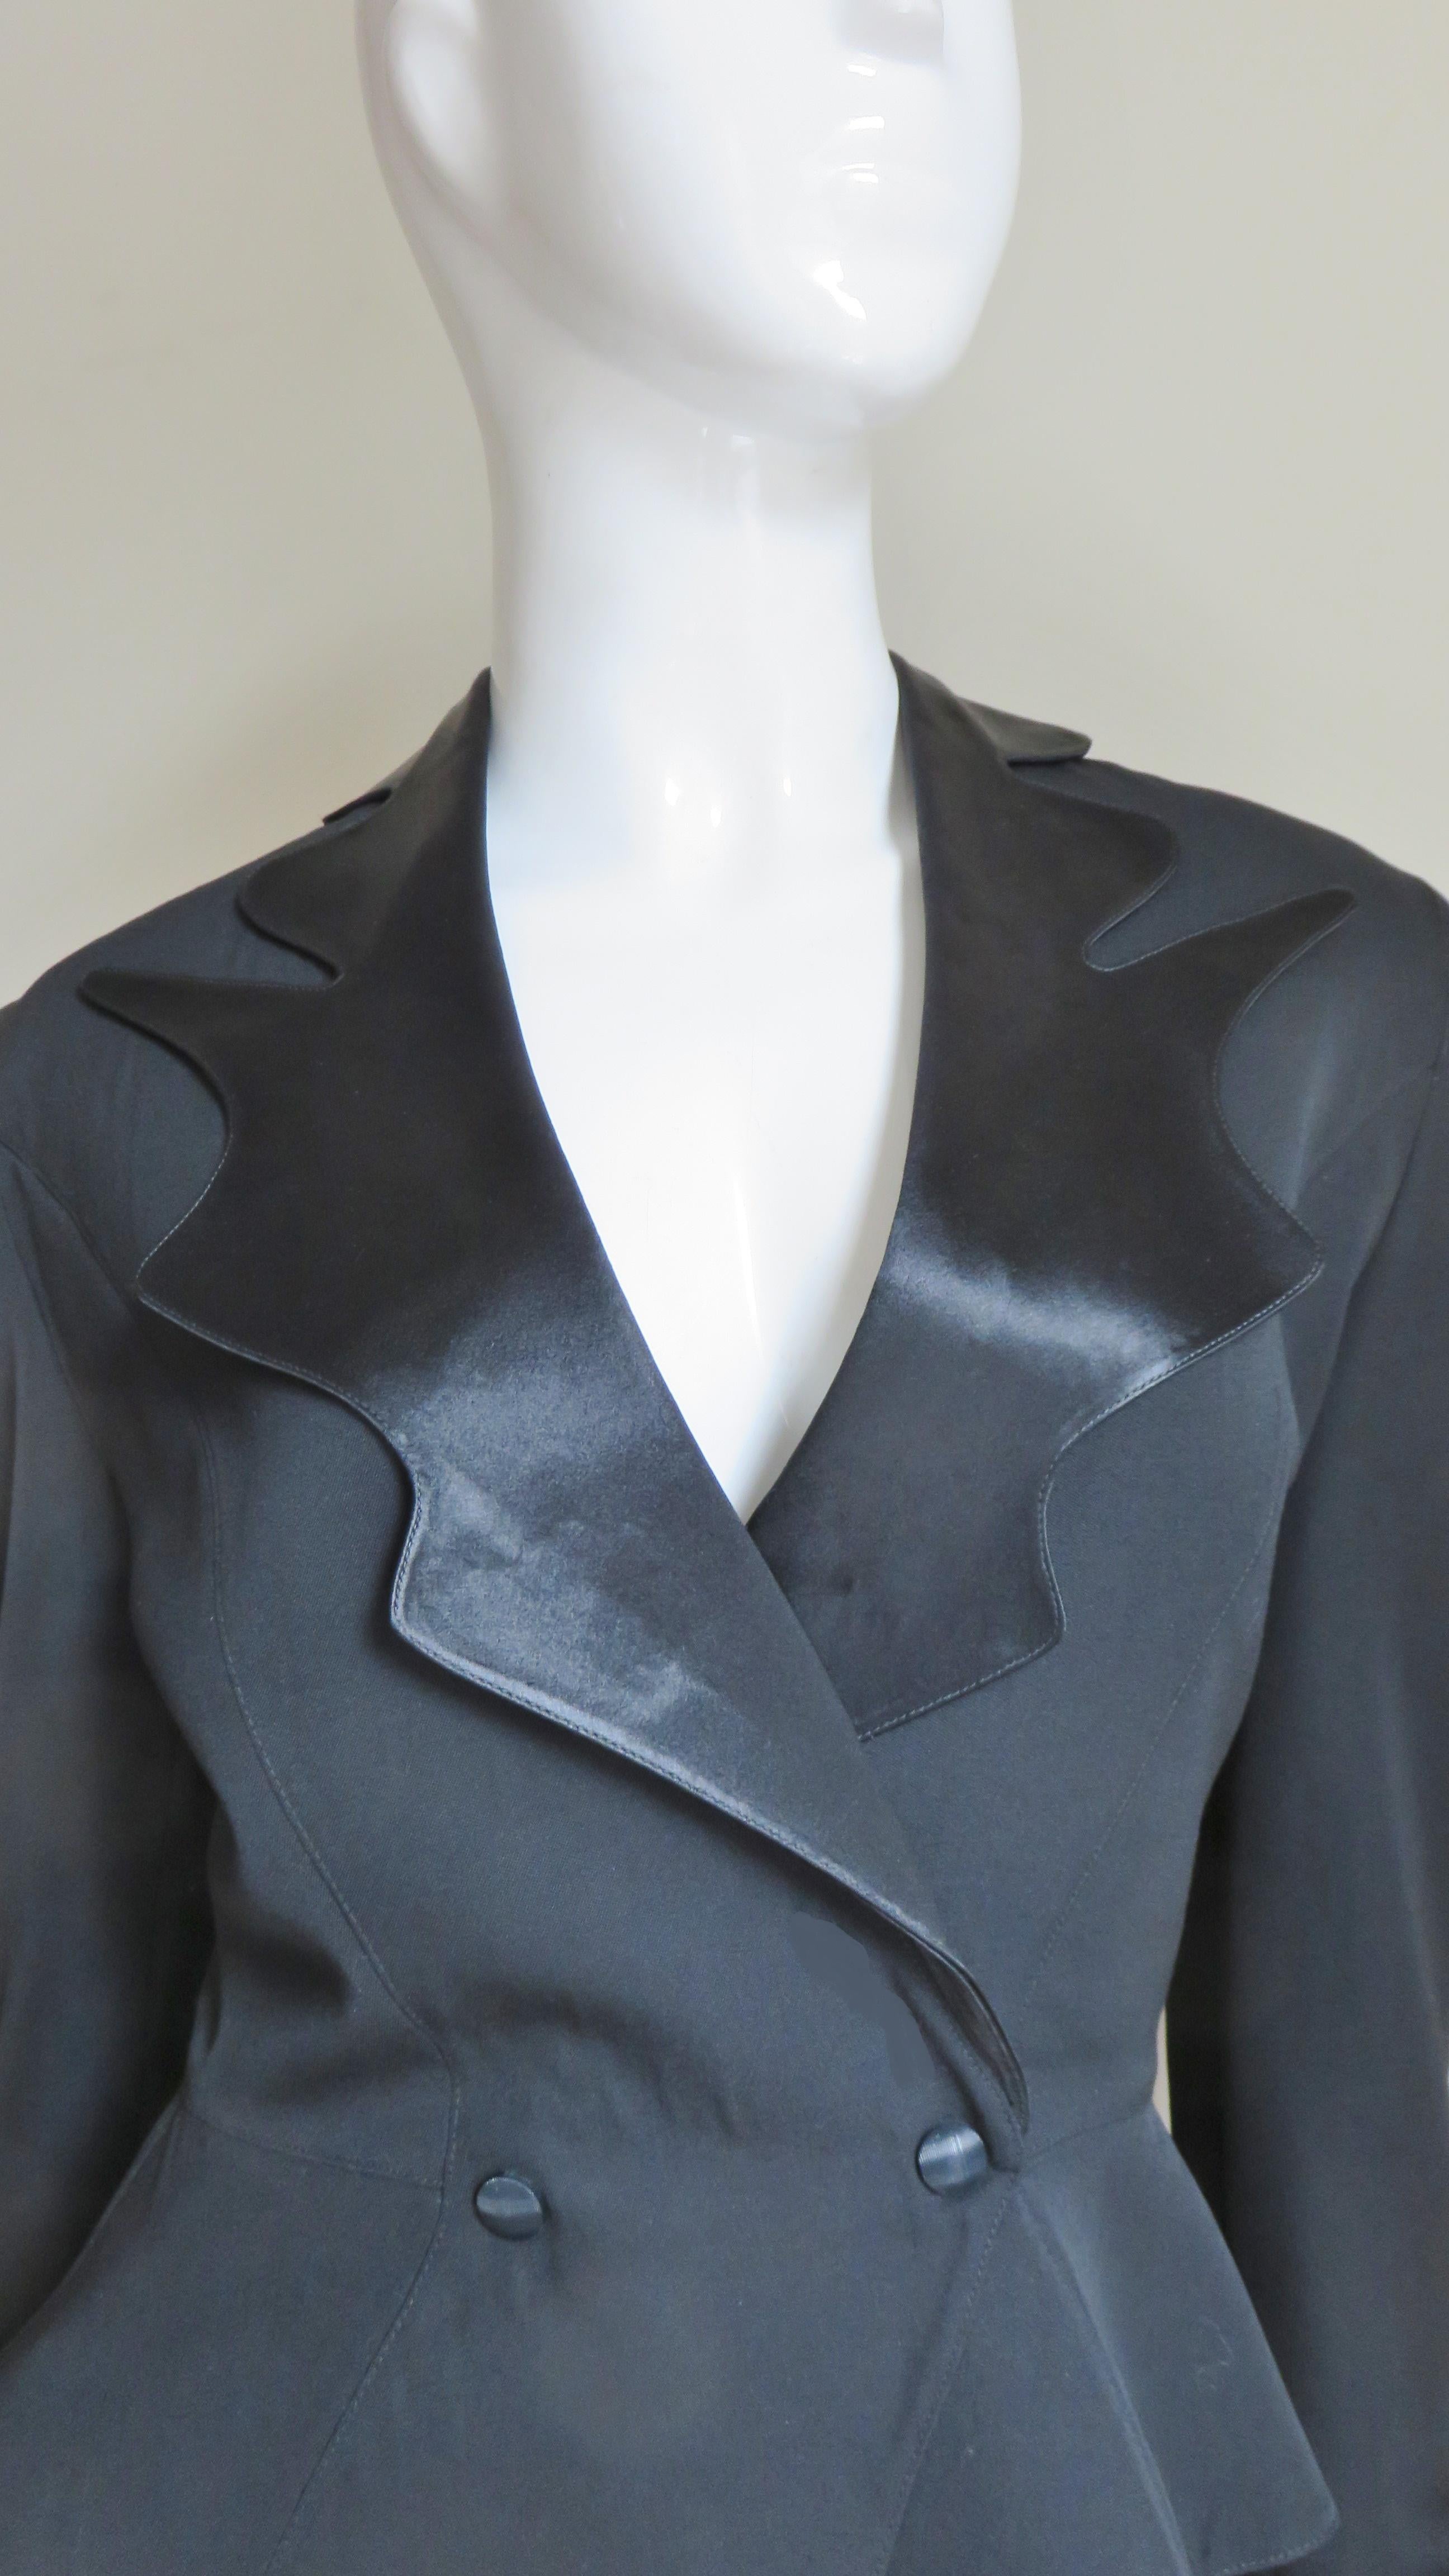 Black Thierry Mugler Asymmetric Lapel Jacket with Cut out Back